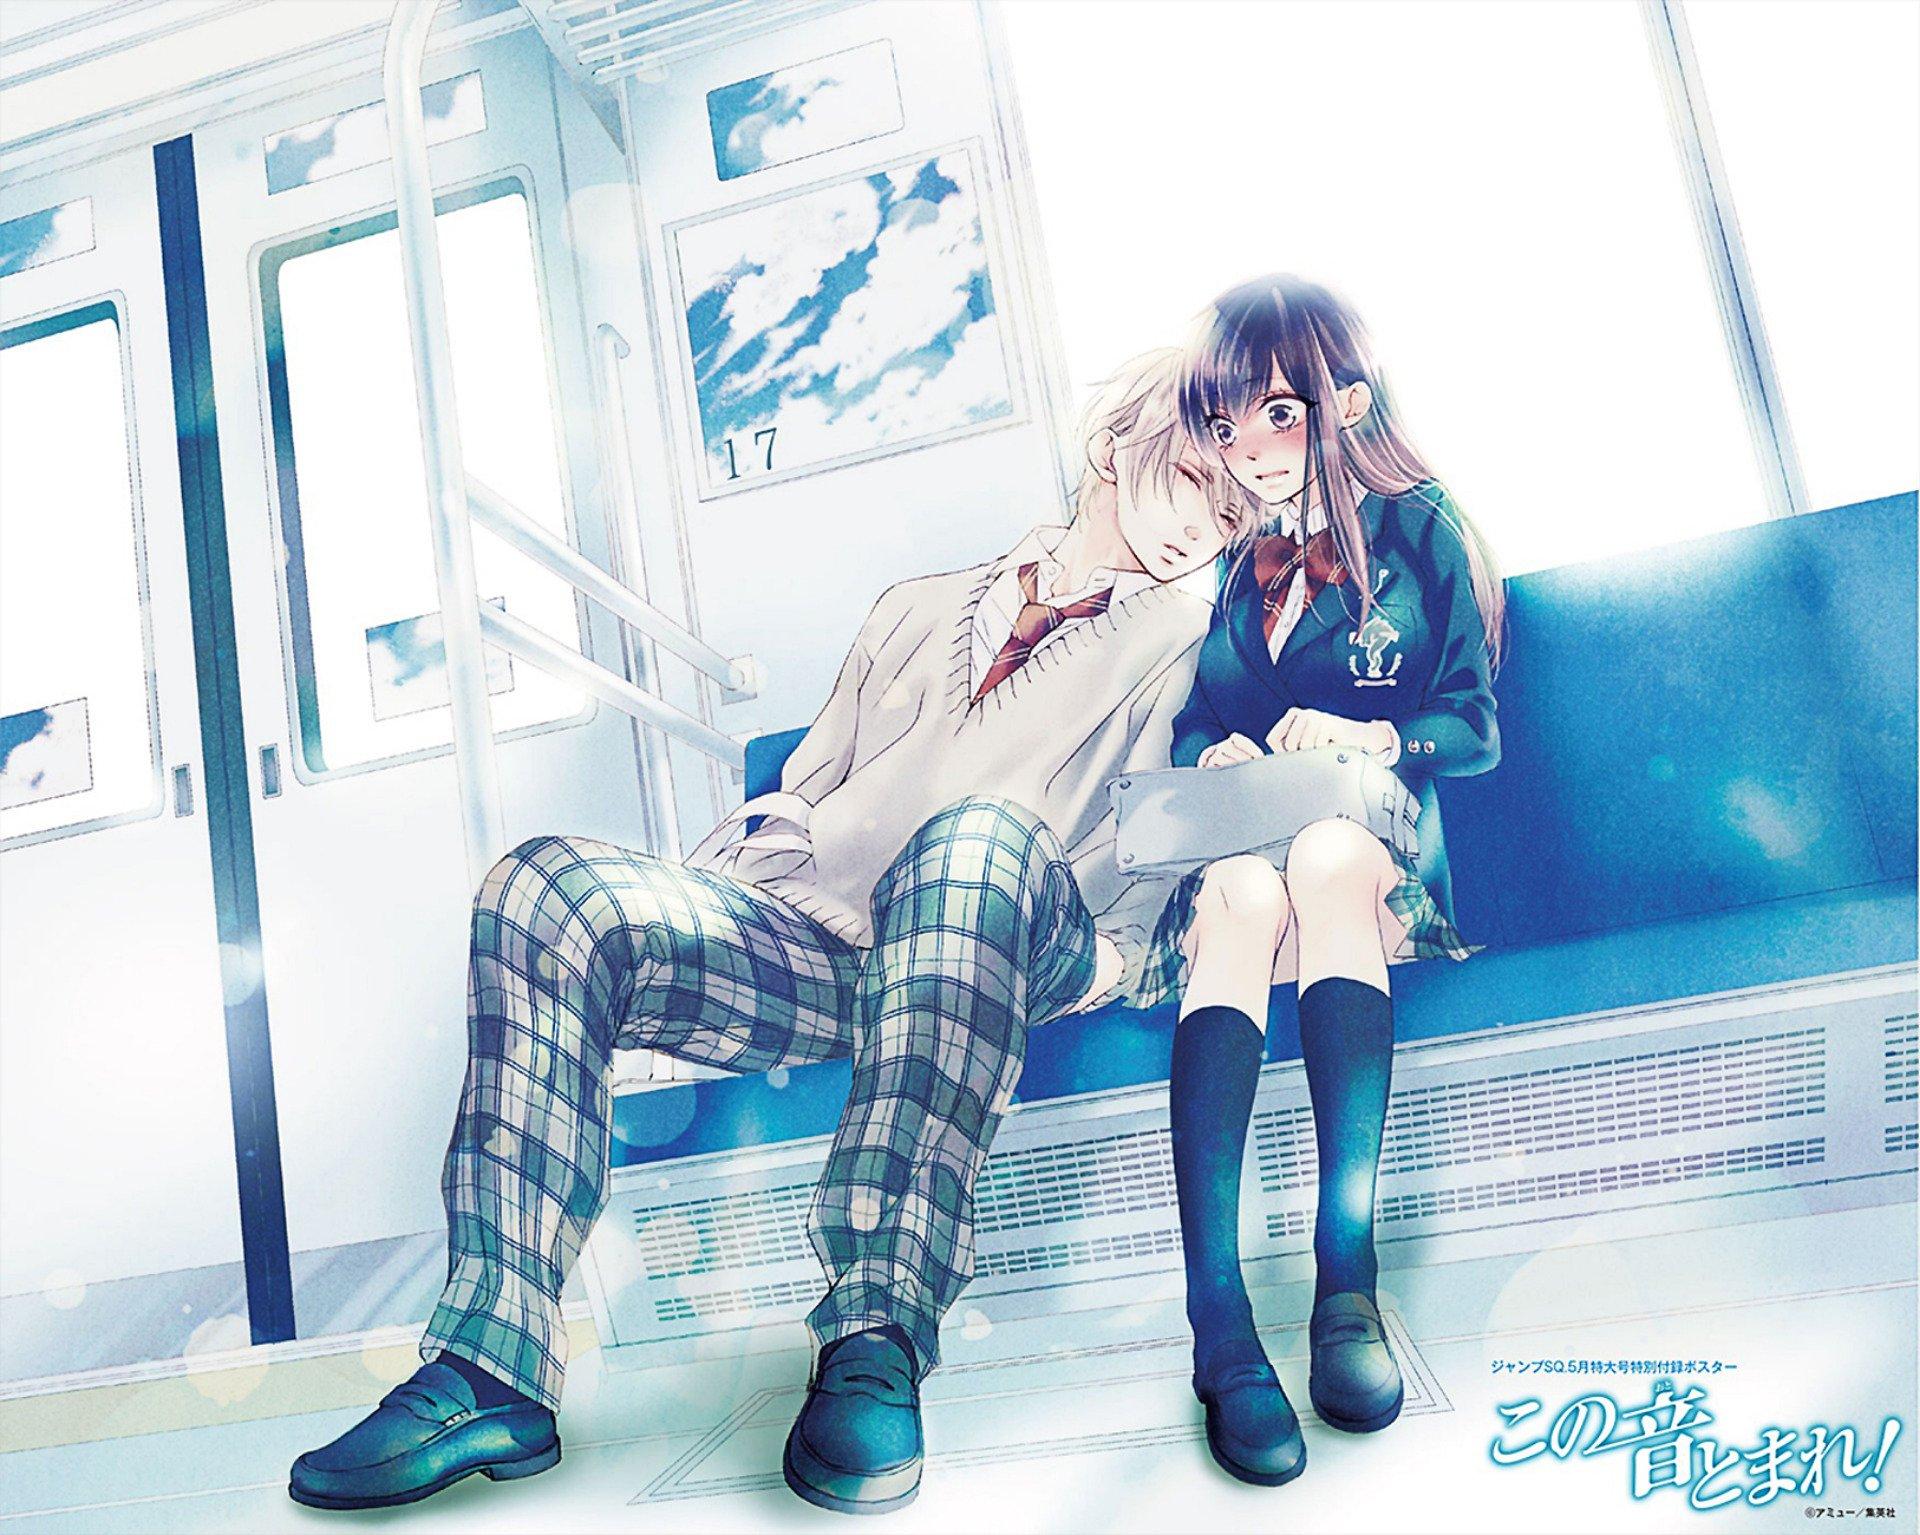 Kono Oto Tomare Sounds of Life Stage Play Reveals 4 More Cast Members   News  Anime News Network